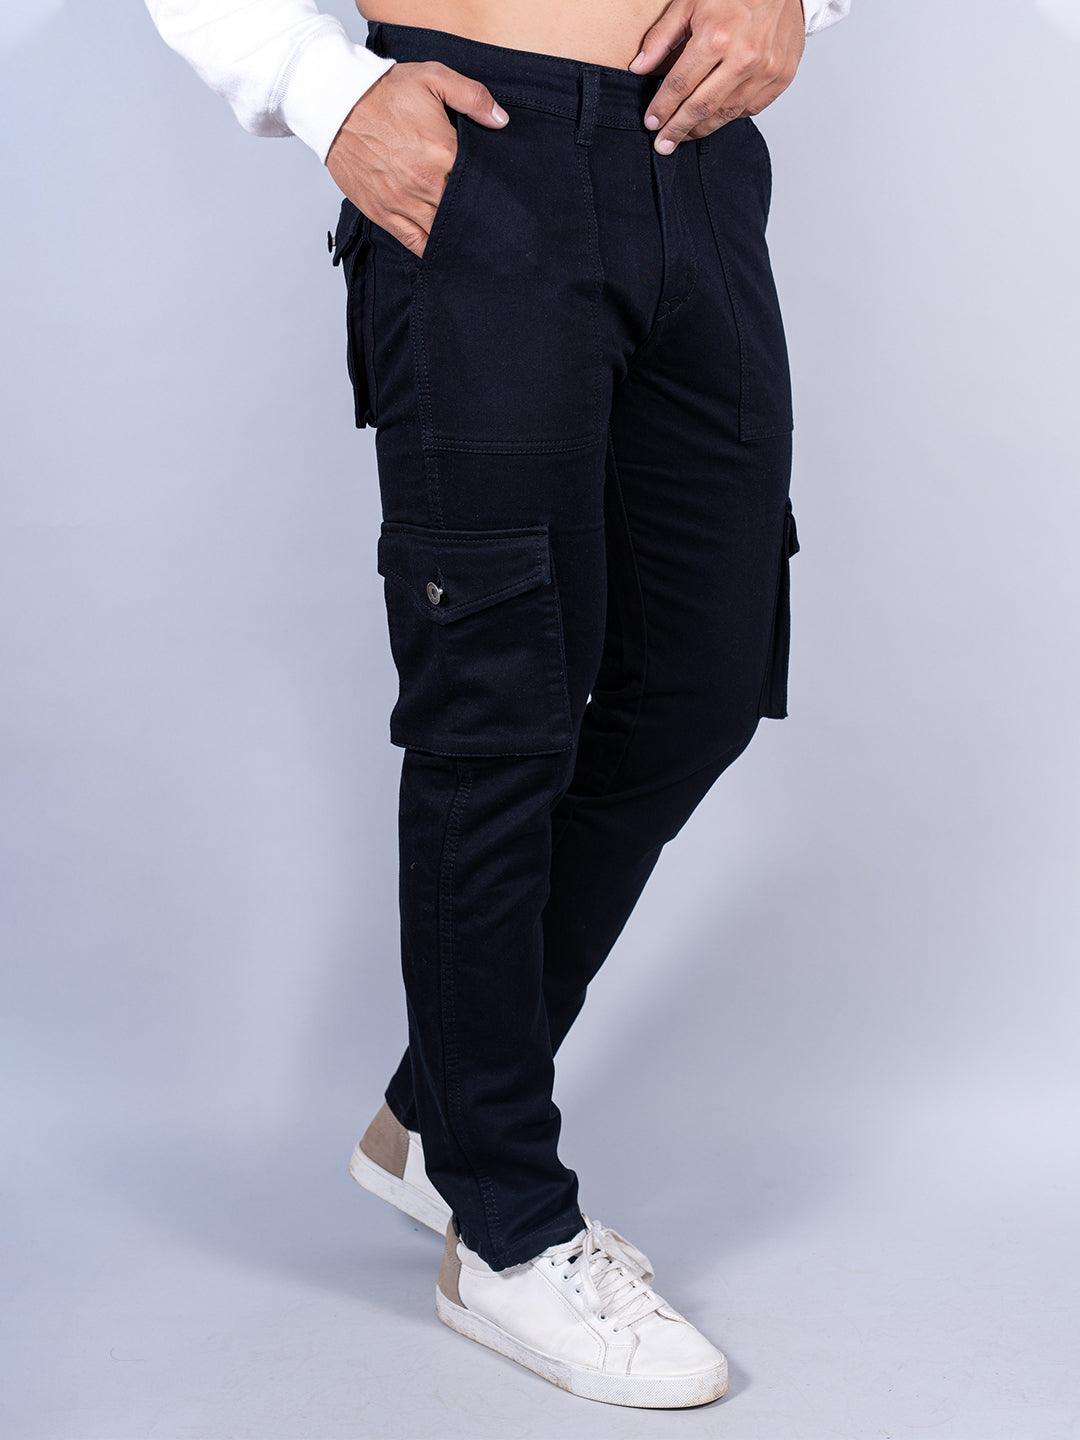 Here's Few Tips Why To Choose Perfect Cargo Pants - Tistabene